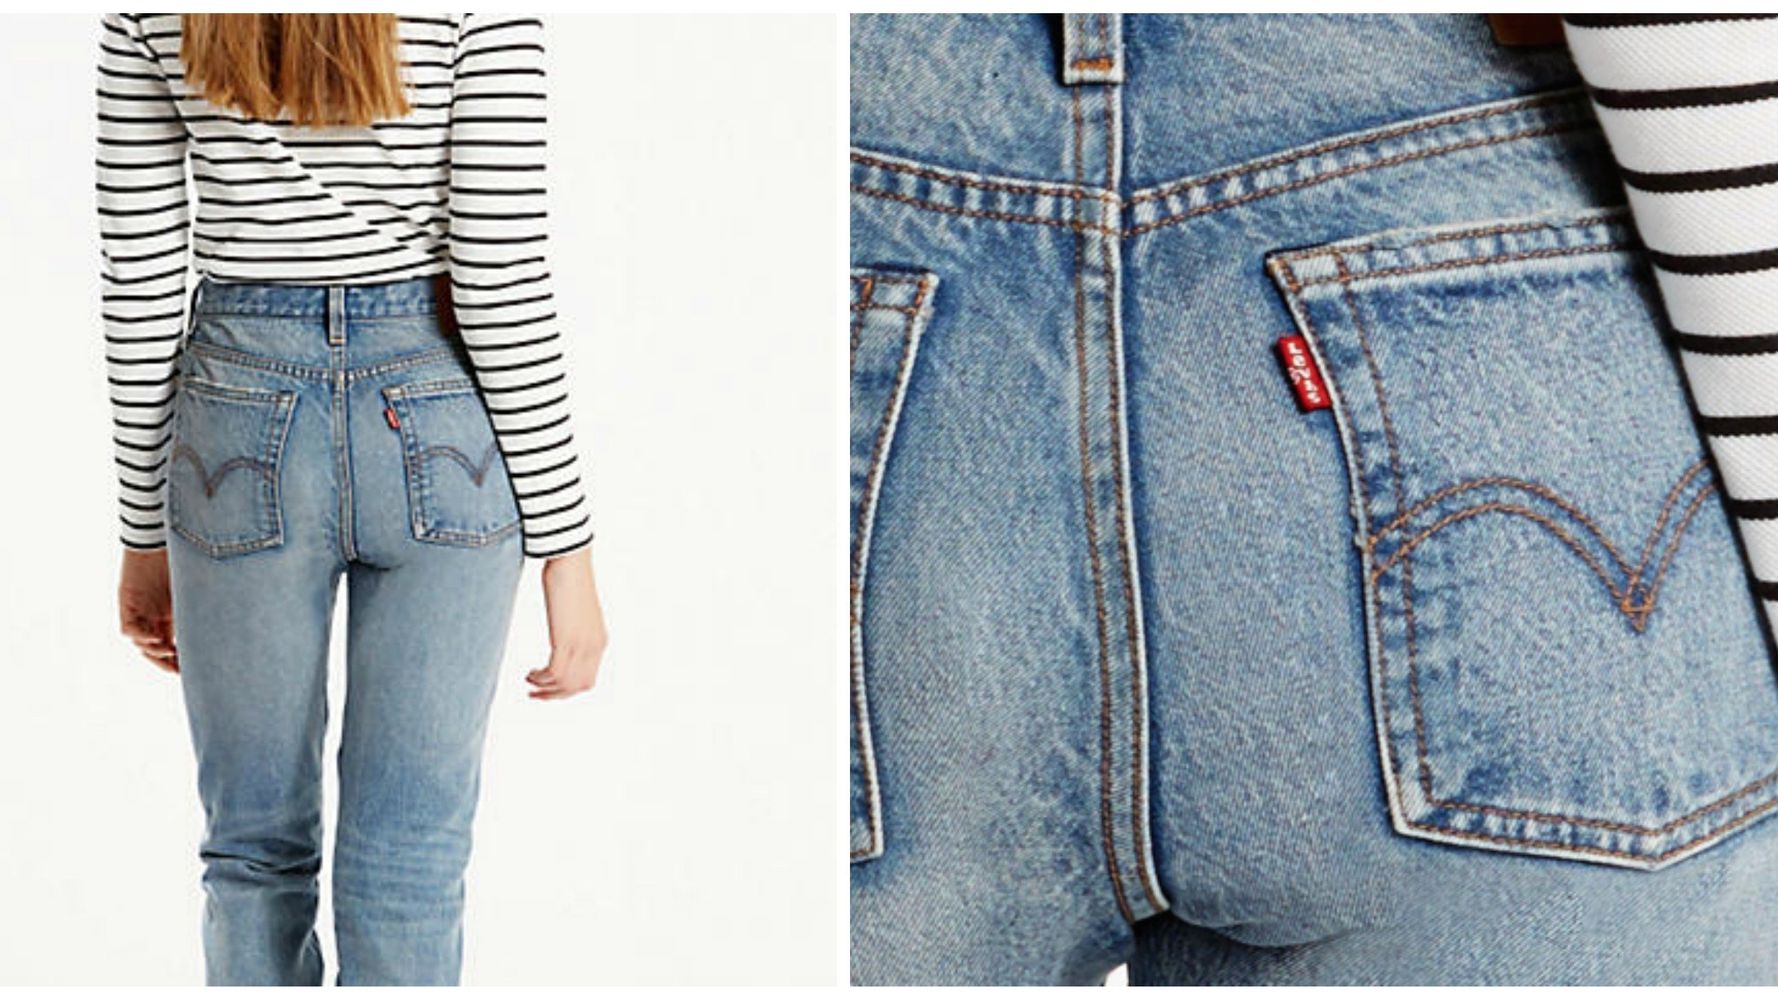 Levi's New 'Wedgie Fit' Jeans Promise To Lift Your Butt Like The Real Thing